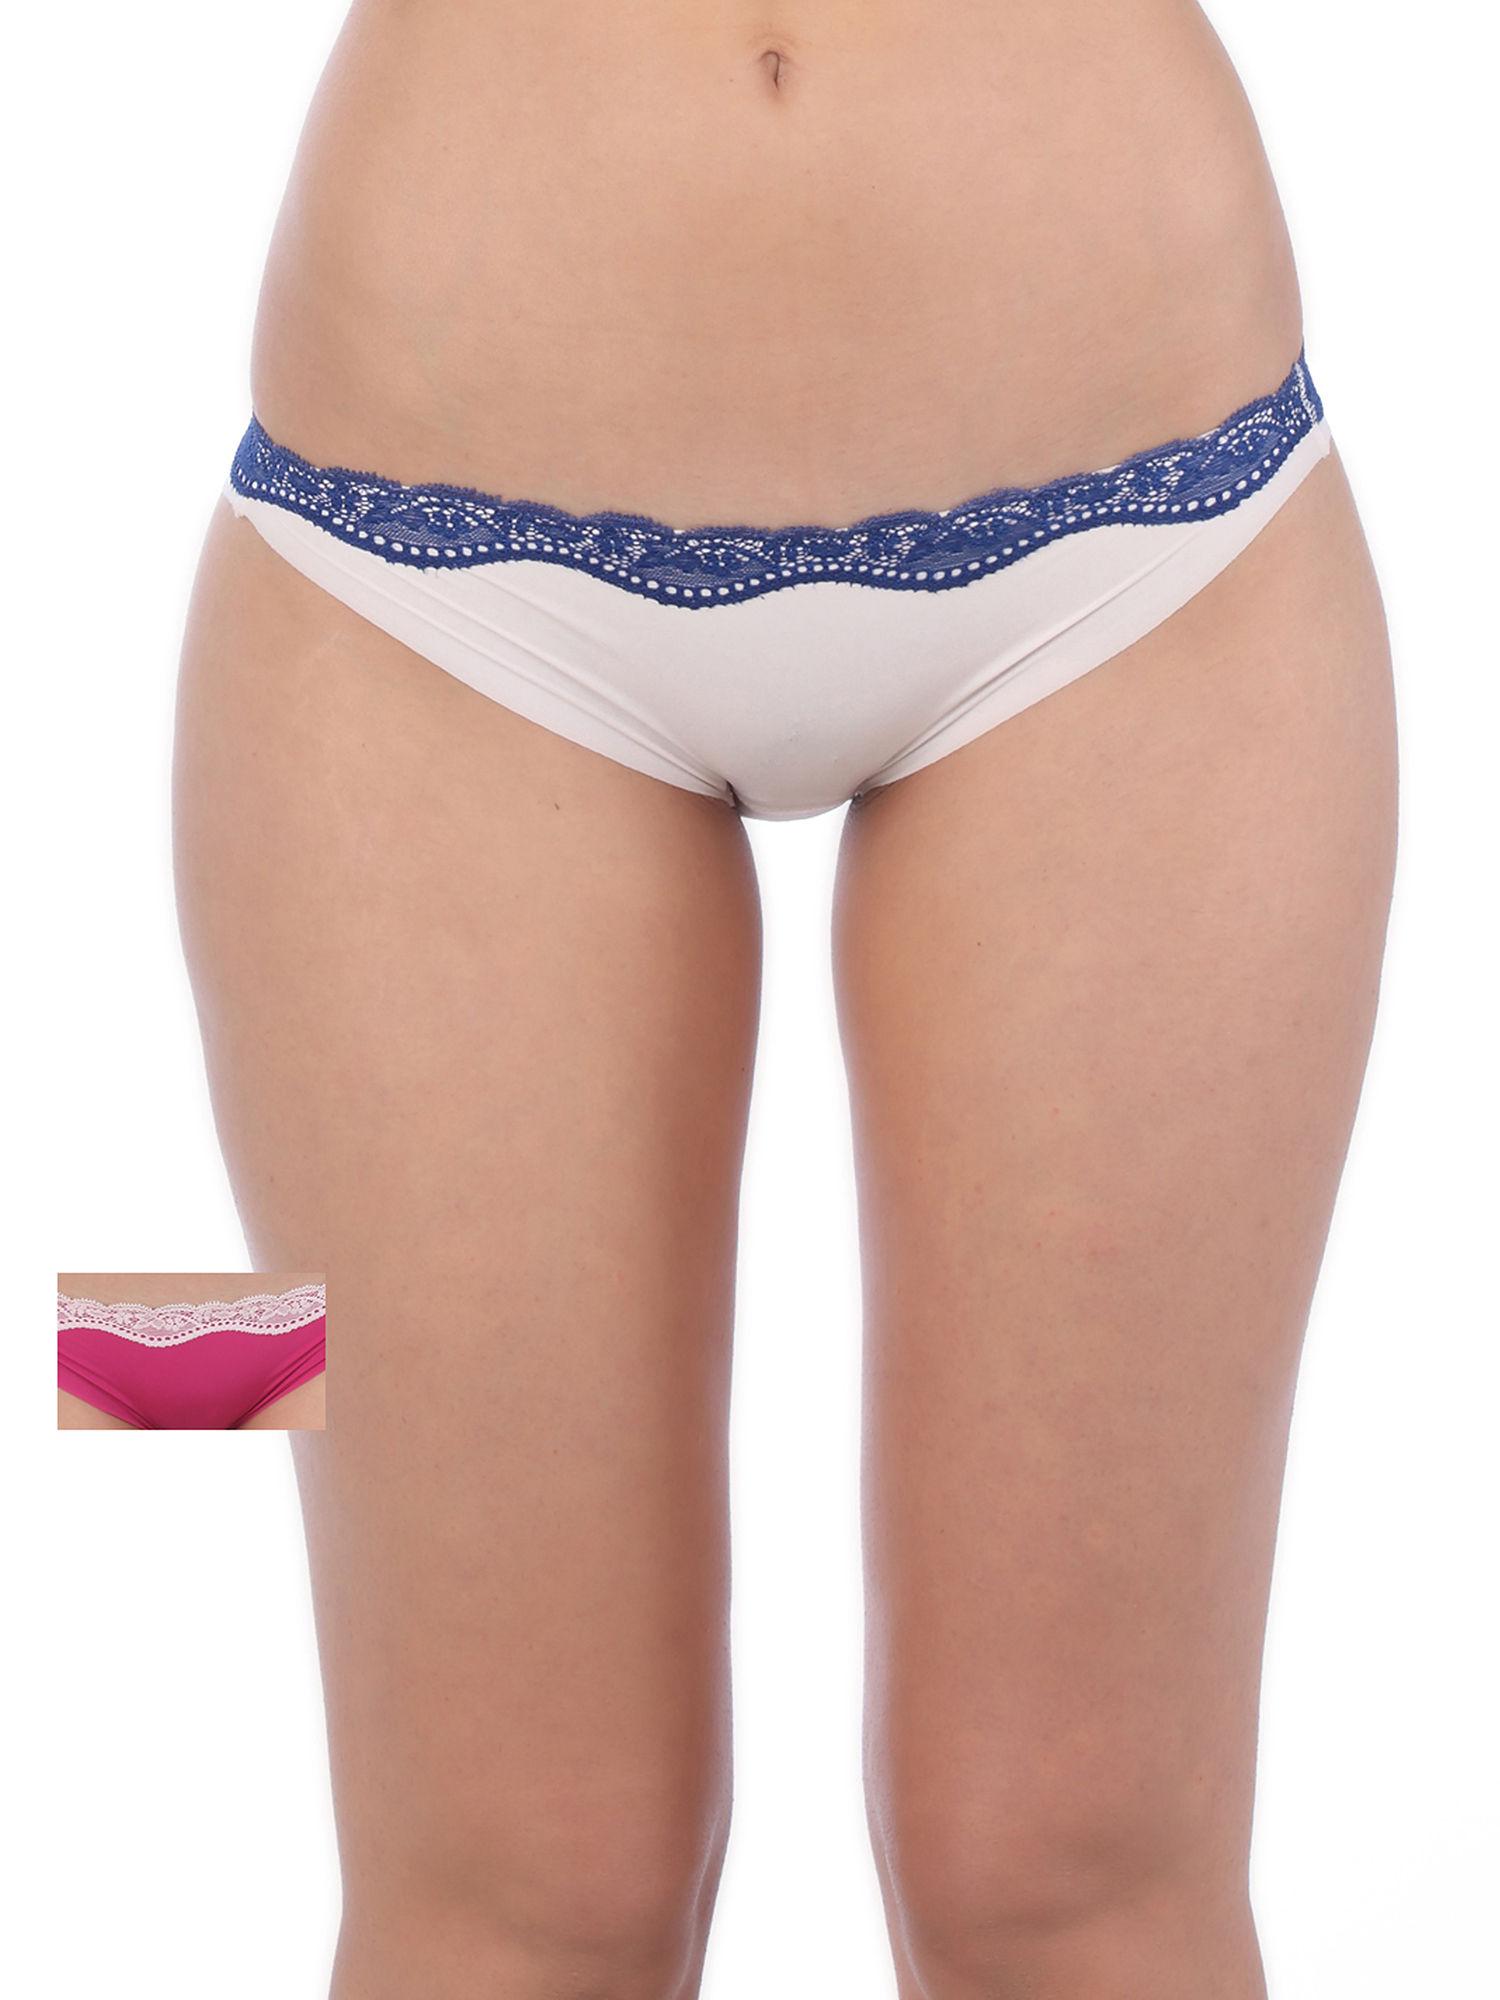 stretty-124-tanga-independent-everyday-lace-brief---pack-of-2---multi-color